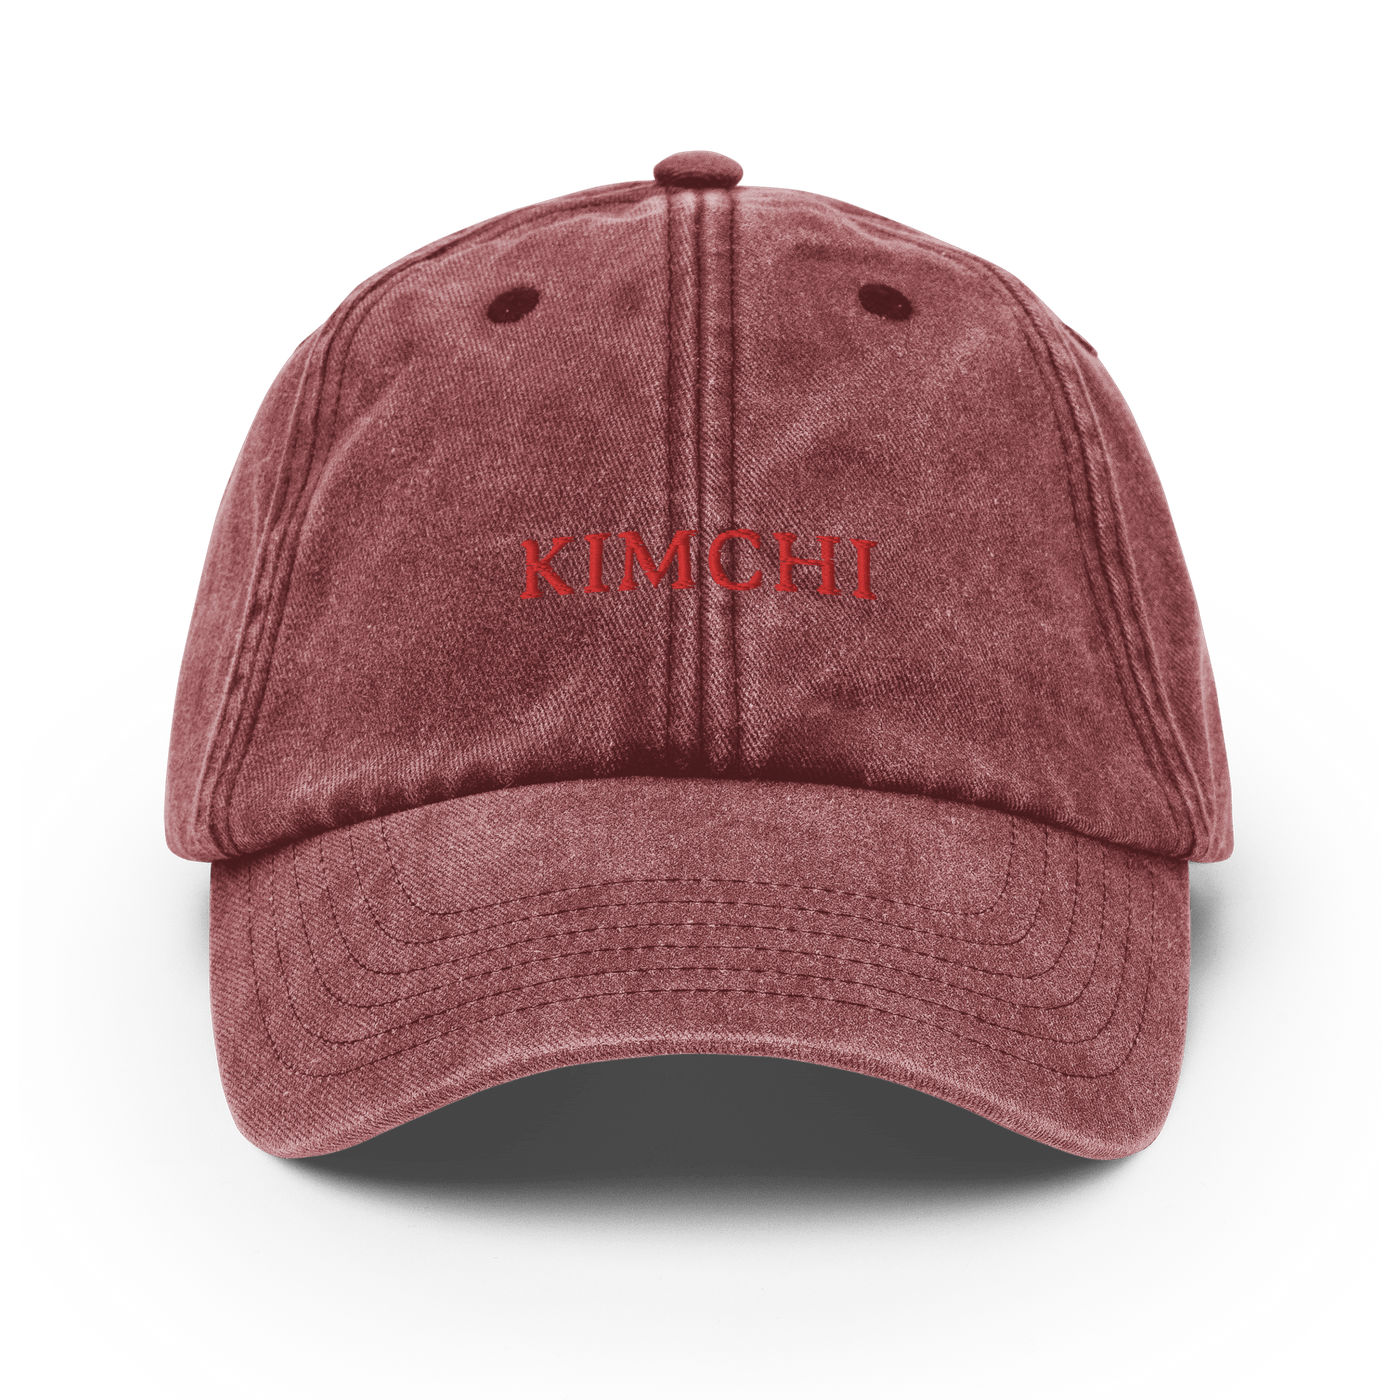 Kimchi Vintage Hat - Vintage Red - - Just Another Cap Store